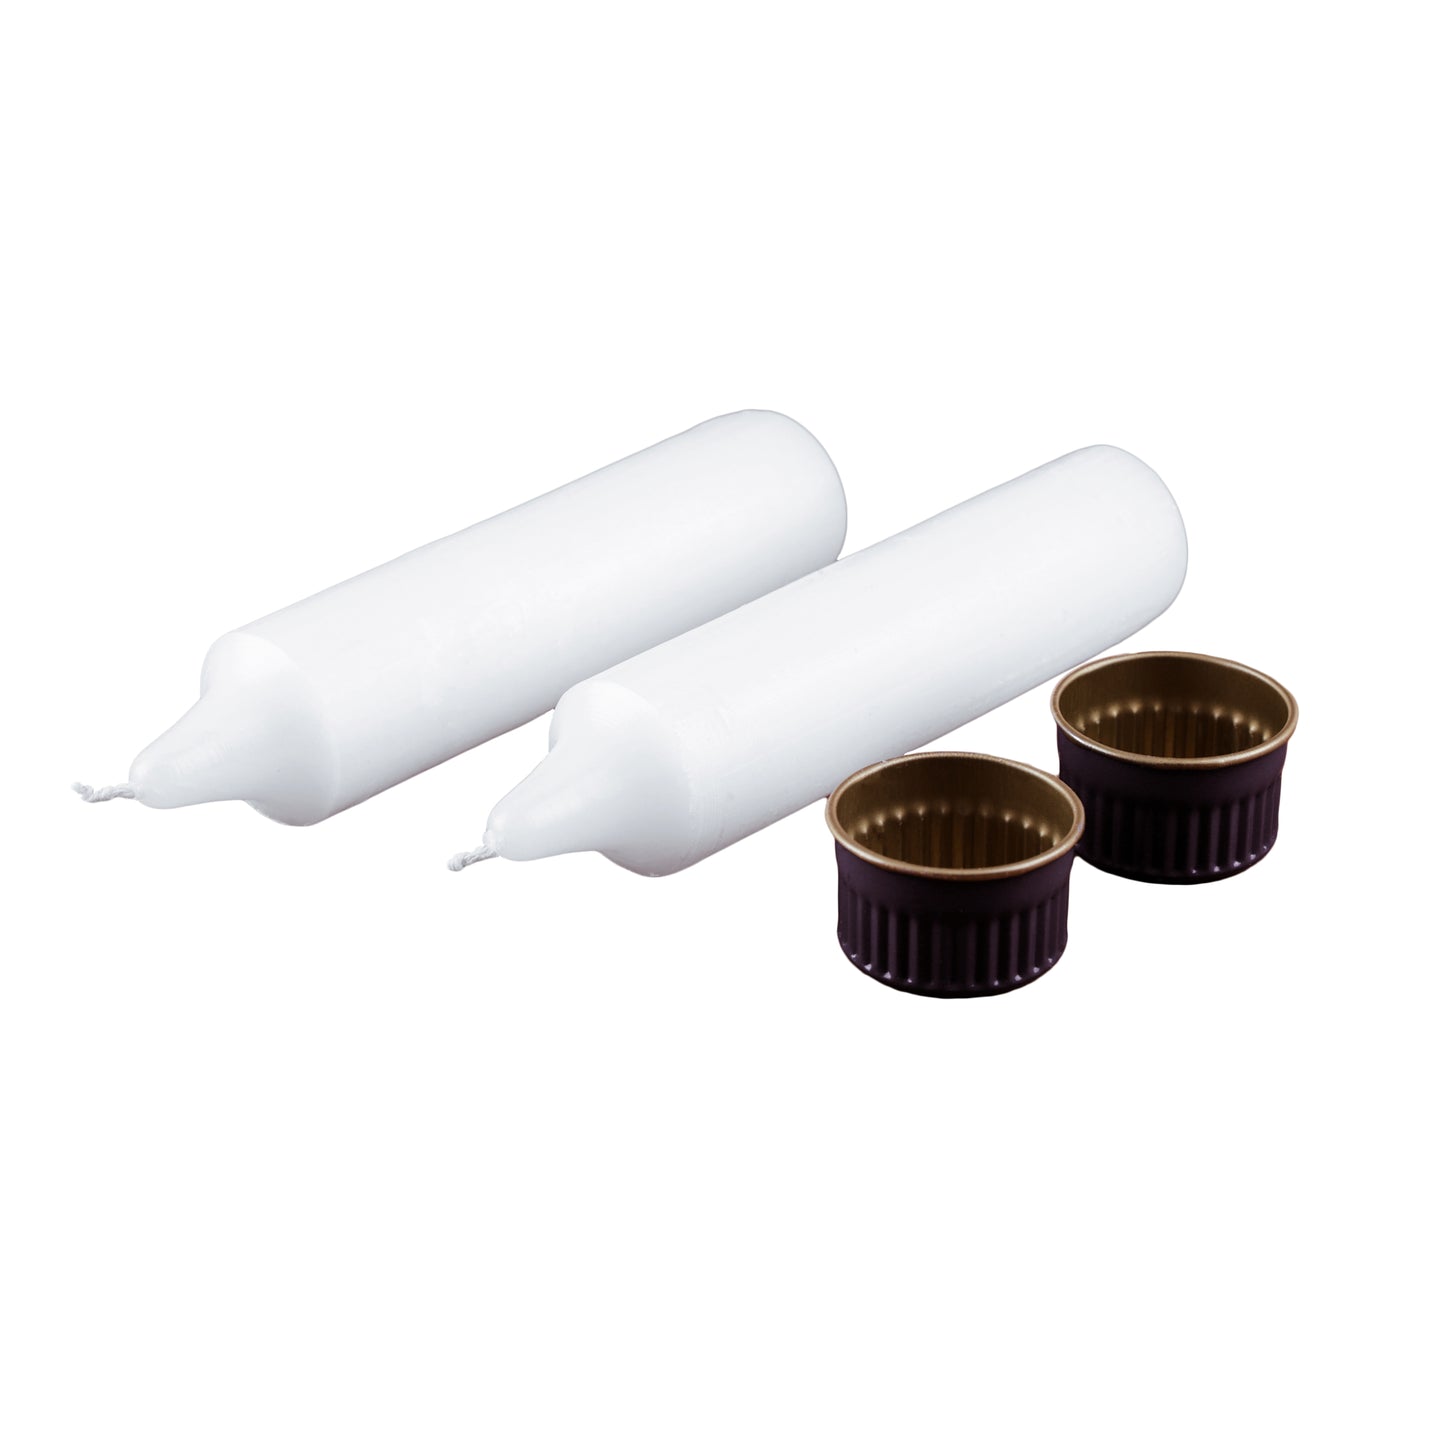 Emergency Candles - 2 Pack